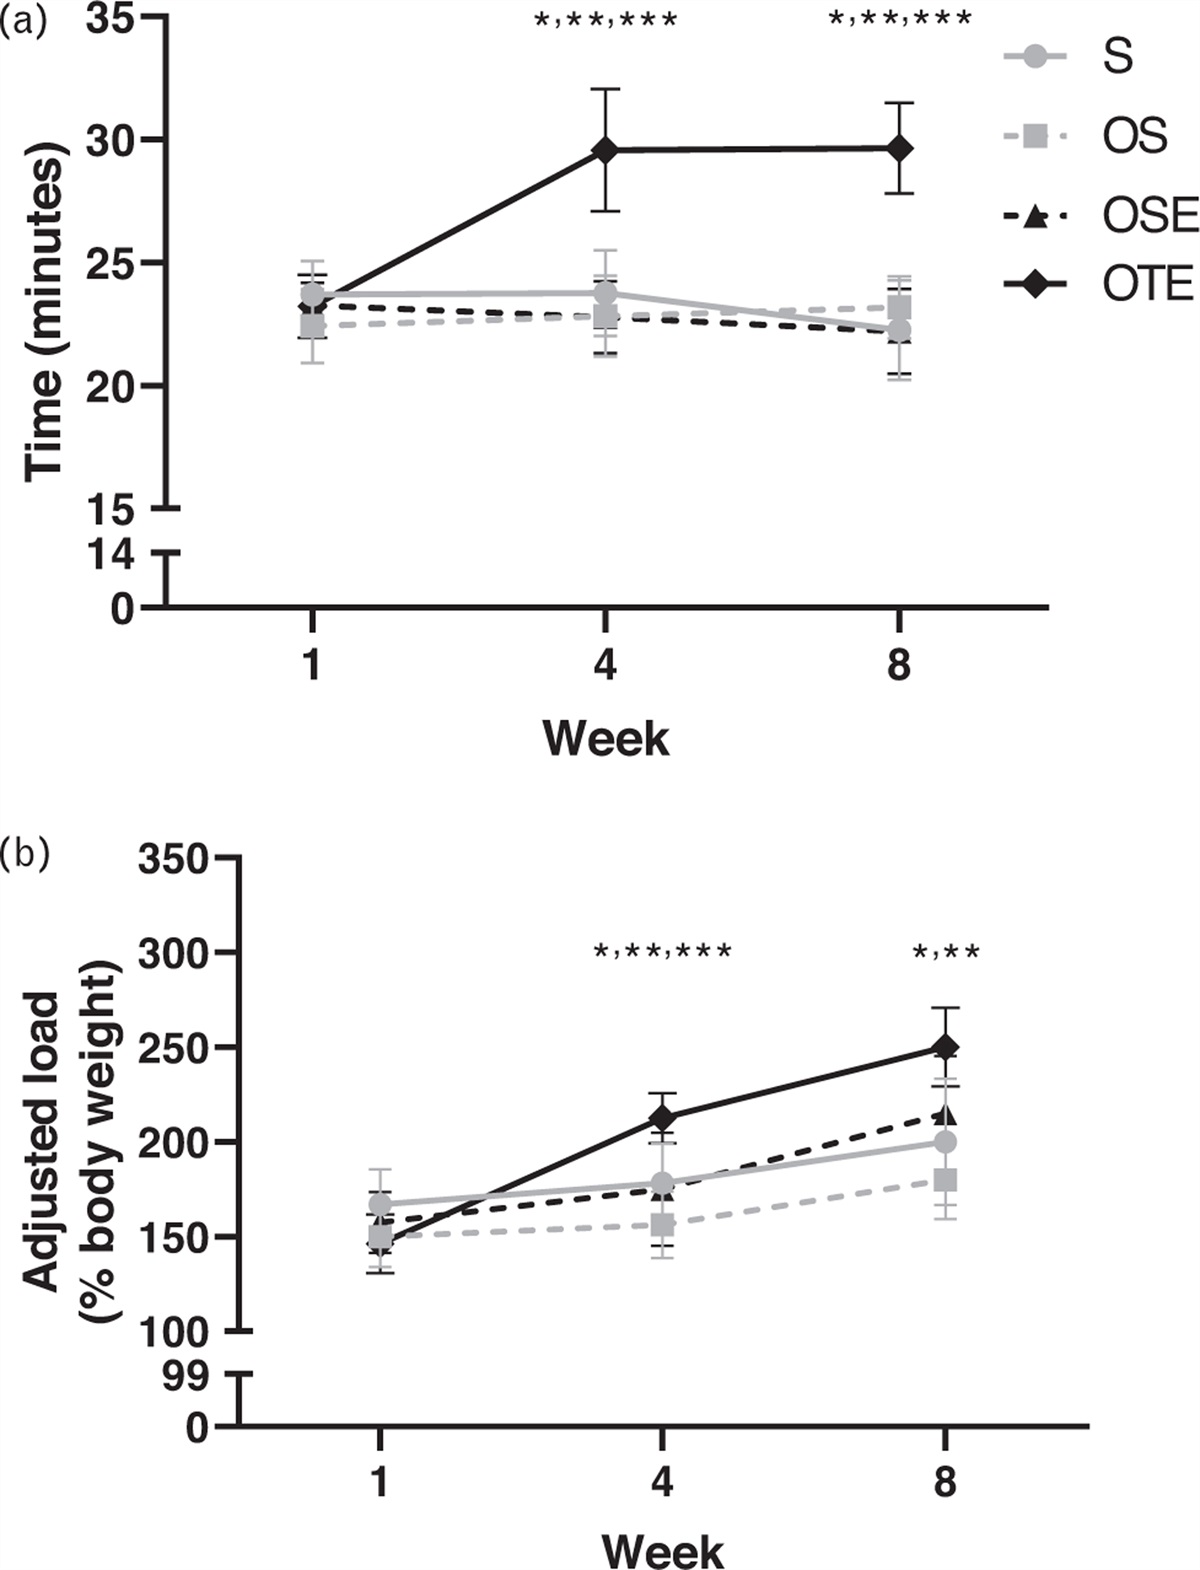 Concurrent exercise training potentiates the effects of angiotensin-converting enzyme inhibitor on regulatory systems of blood pressure control in ovariectomized hypertensive rats